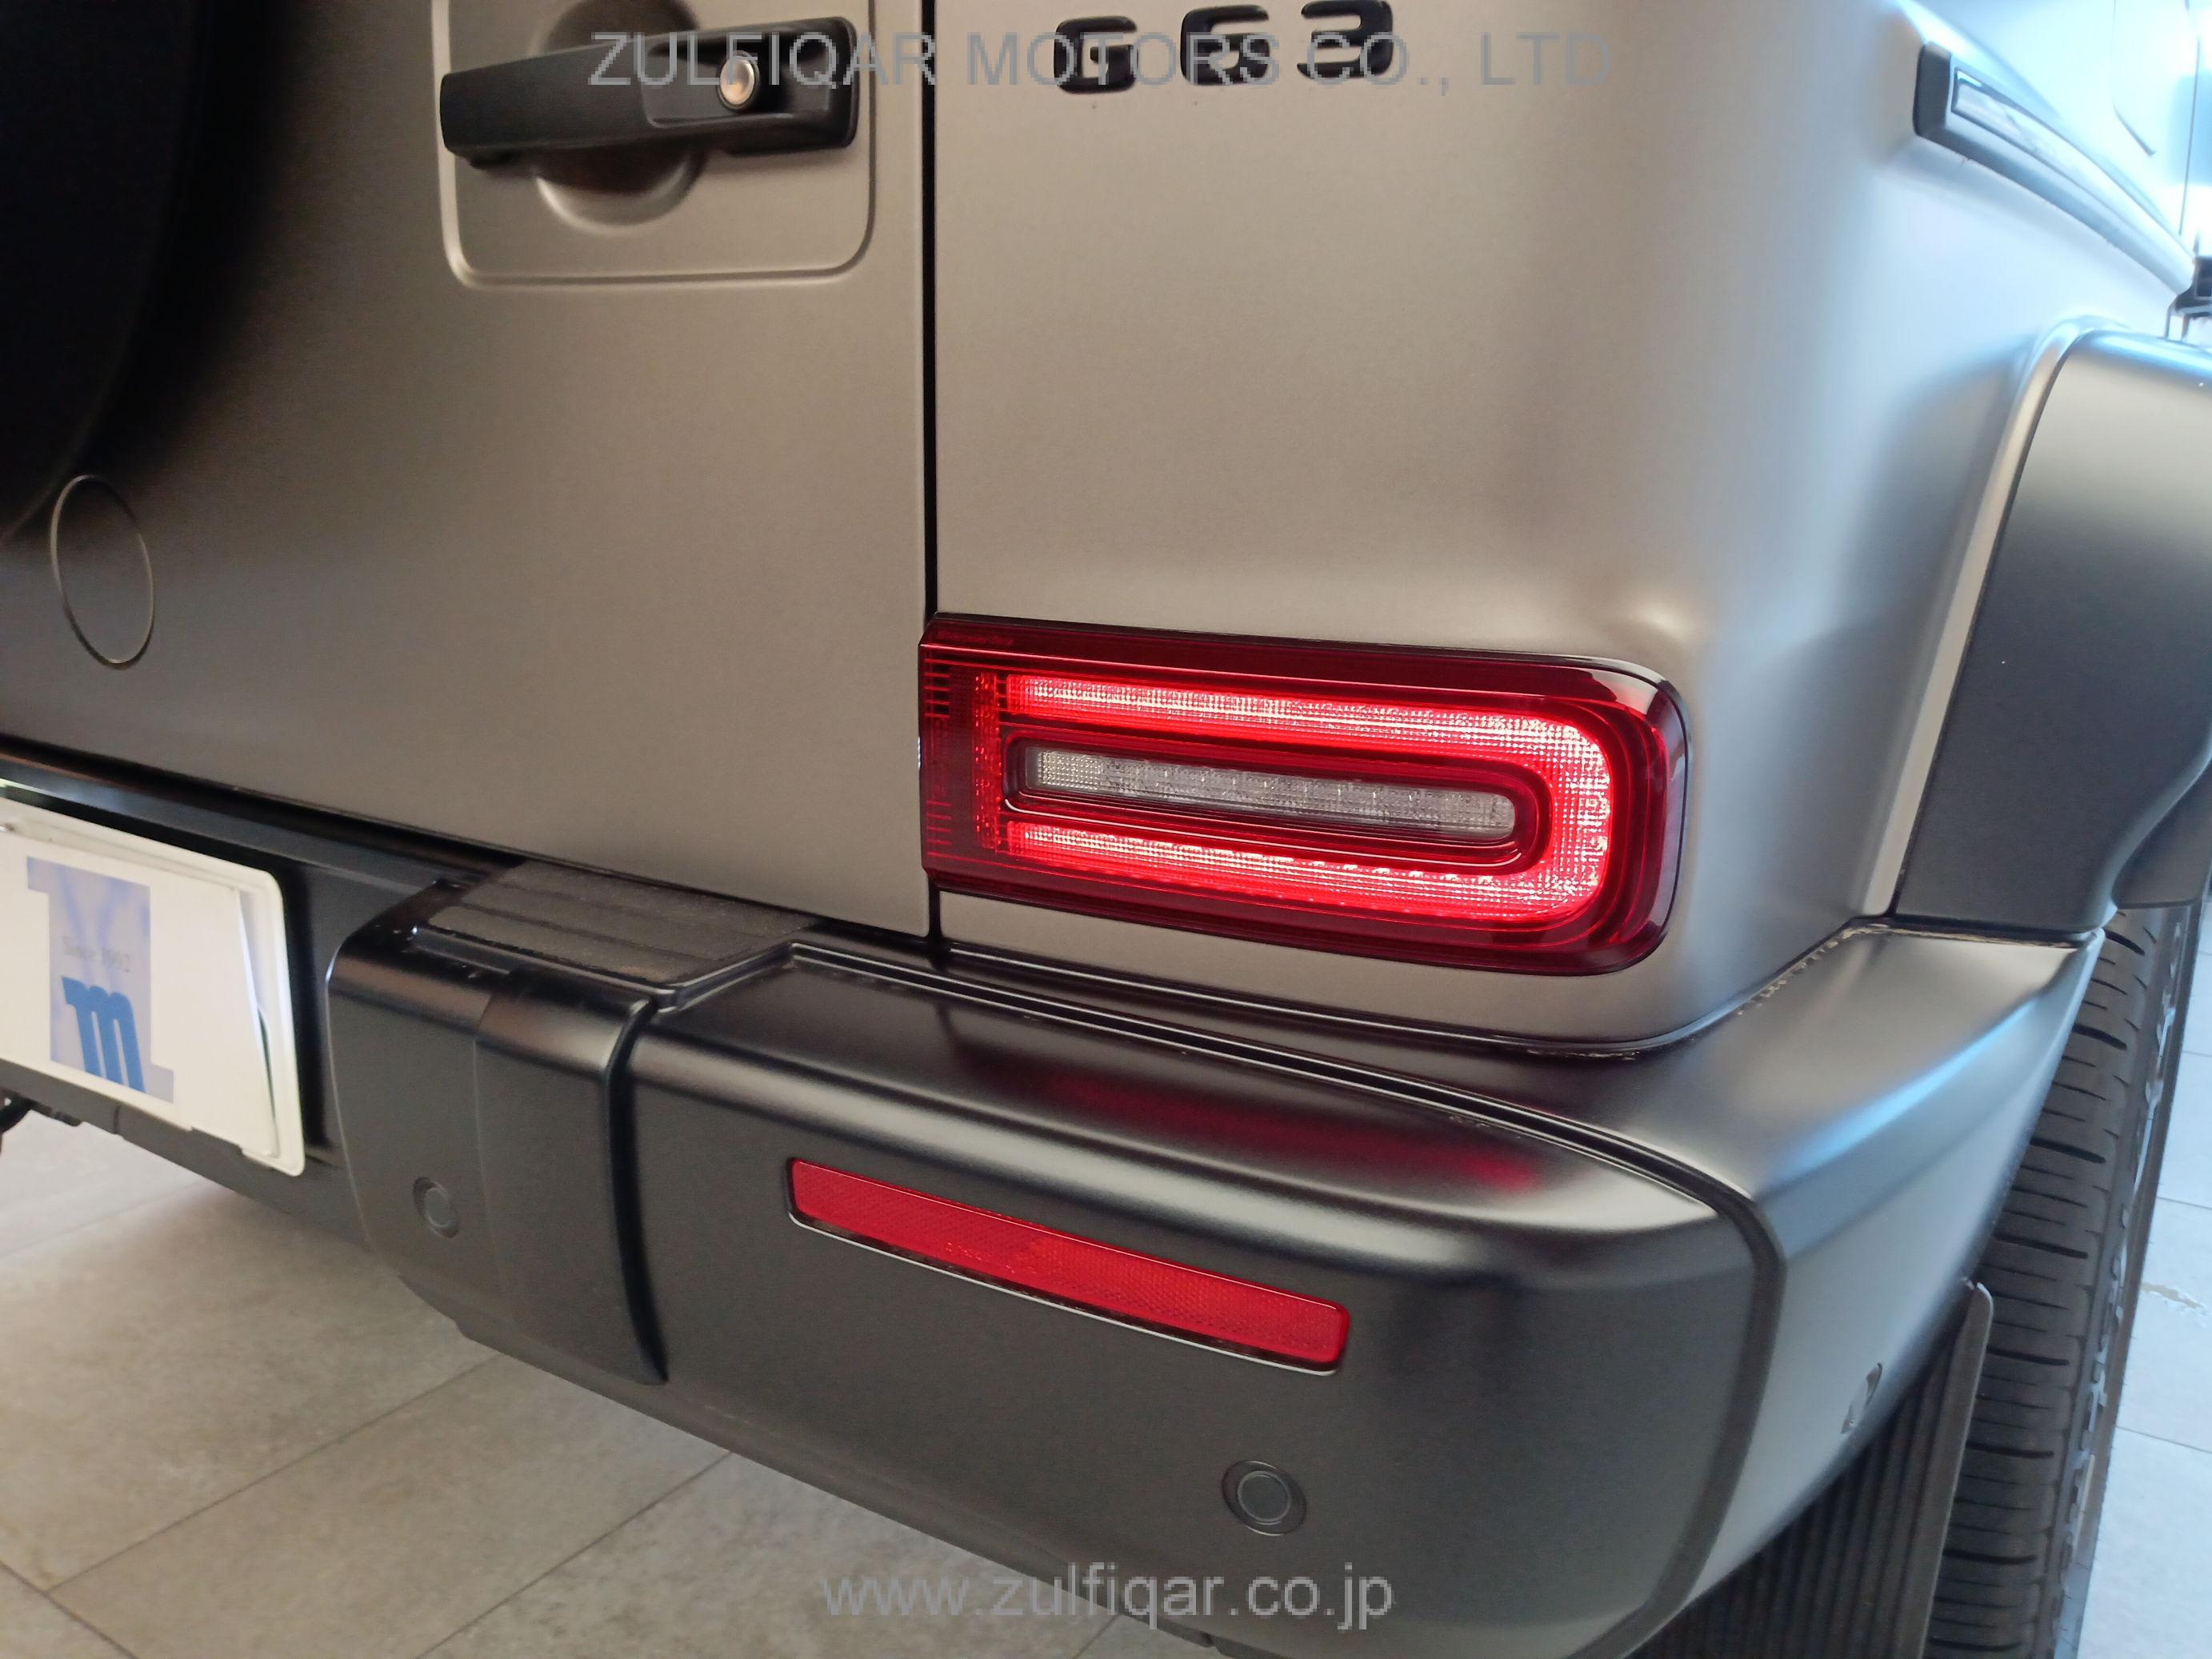 MERCEDES AMG G CLASS 2021 Image 97